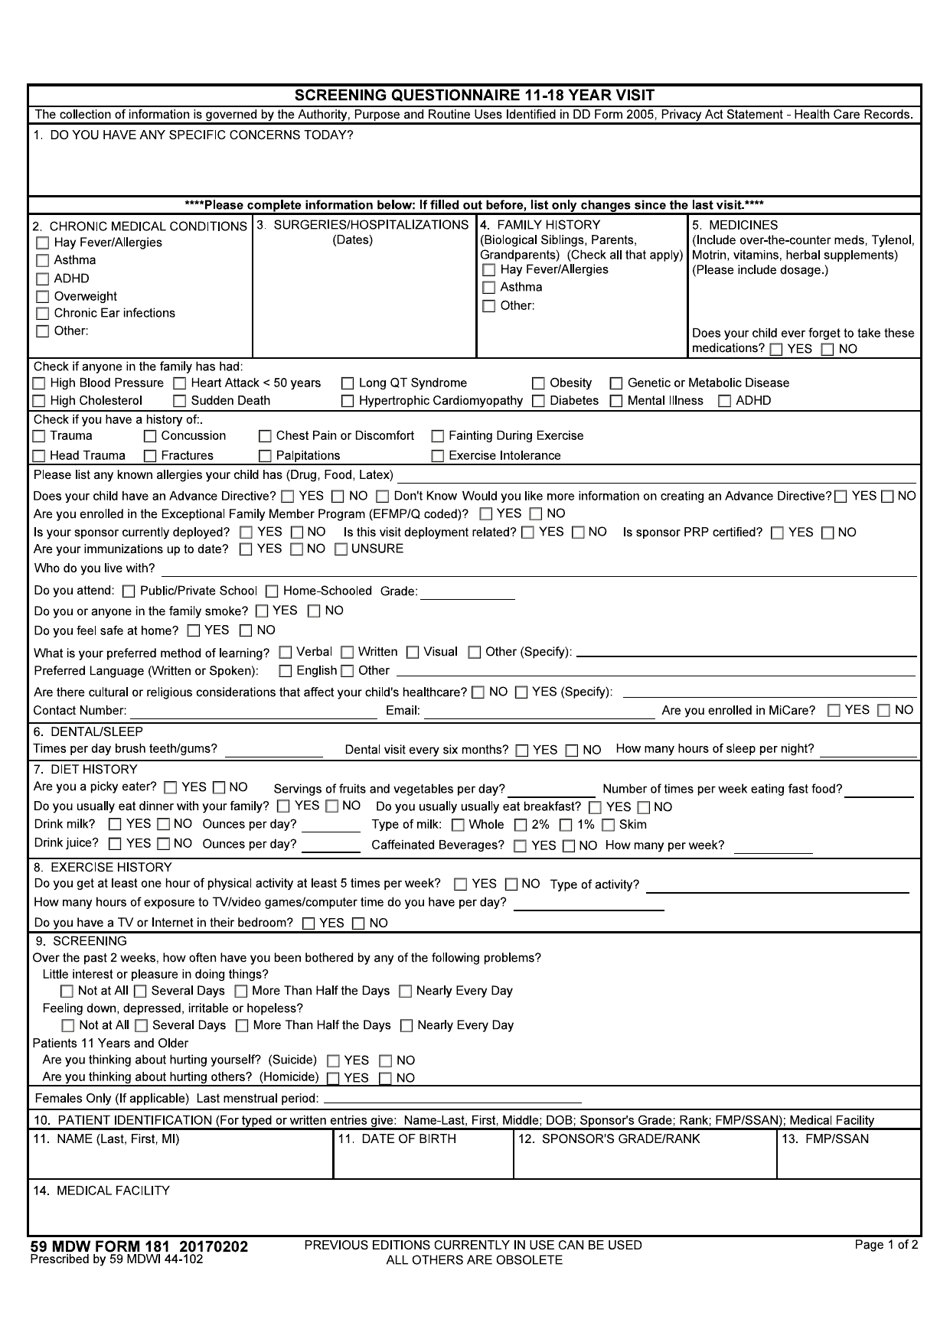 59 MDW Form 181 Screening Questionnaire 12-18 Year Visit, Page 1